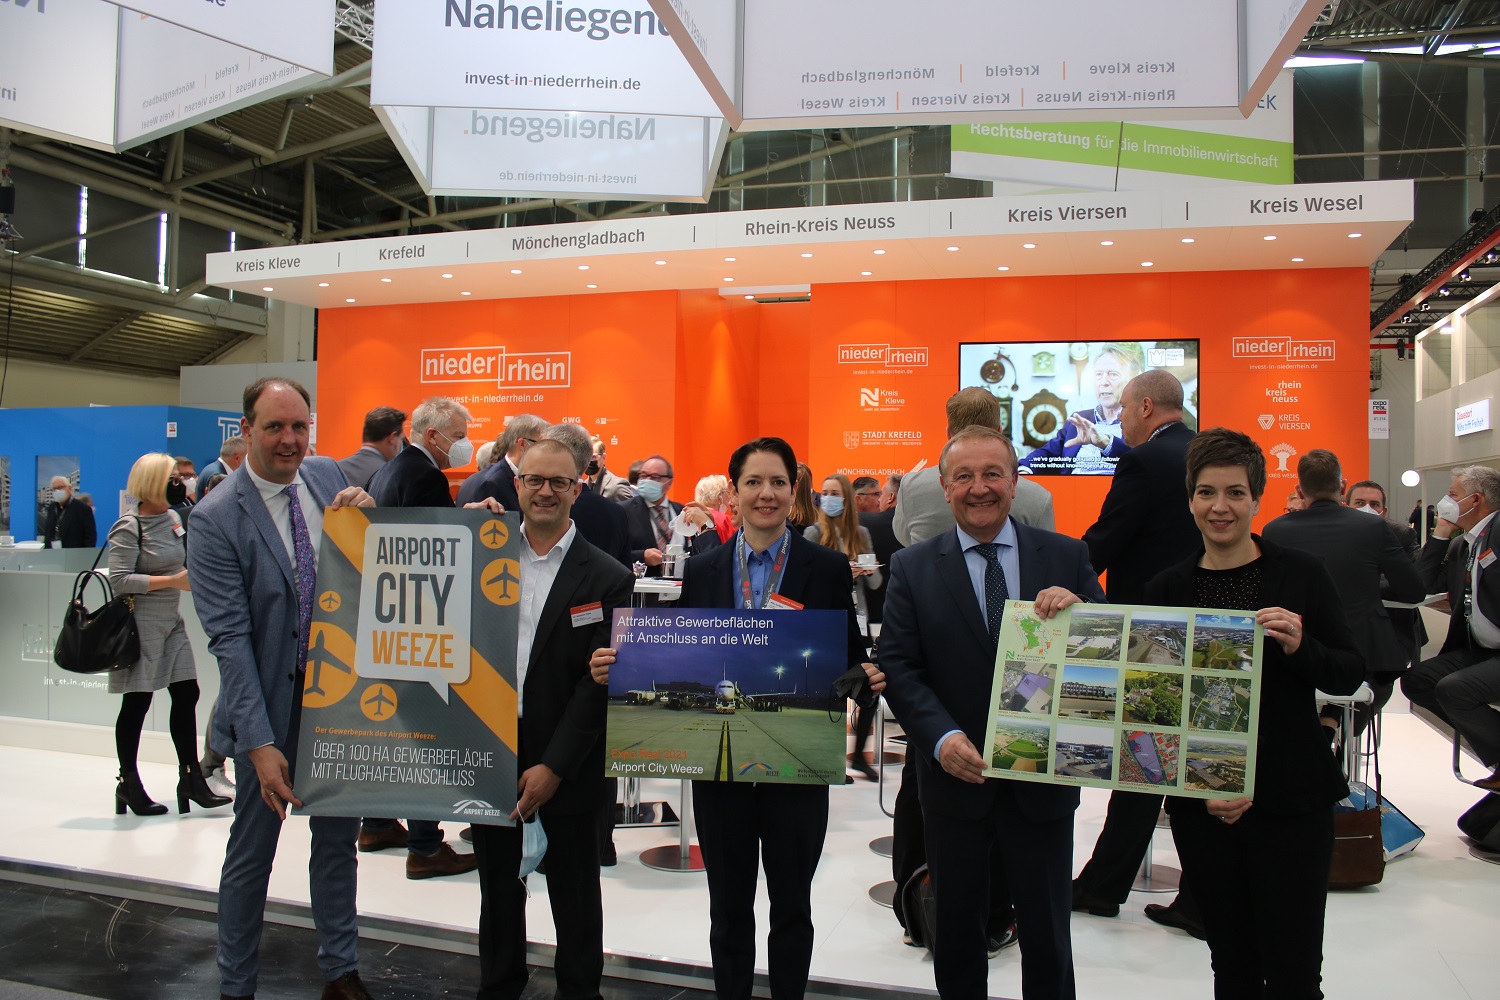 Expo Real Airport City Weeze PI